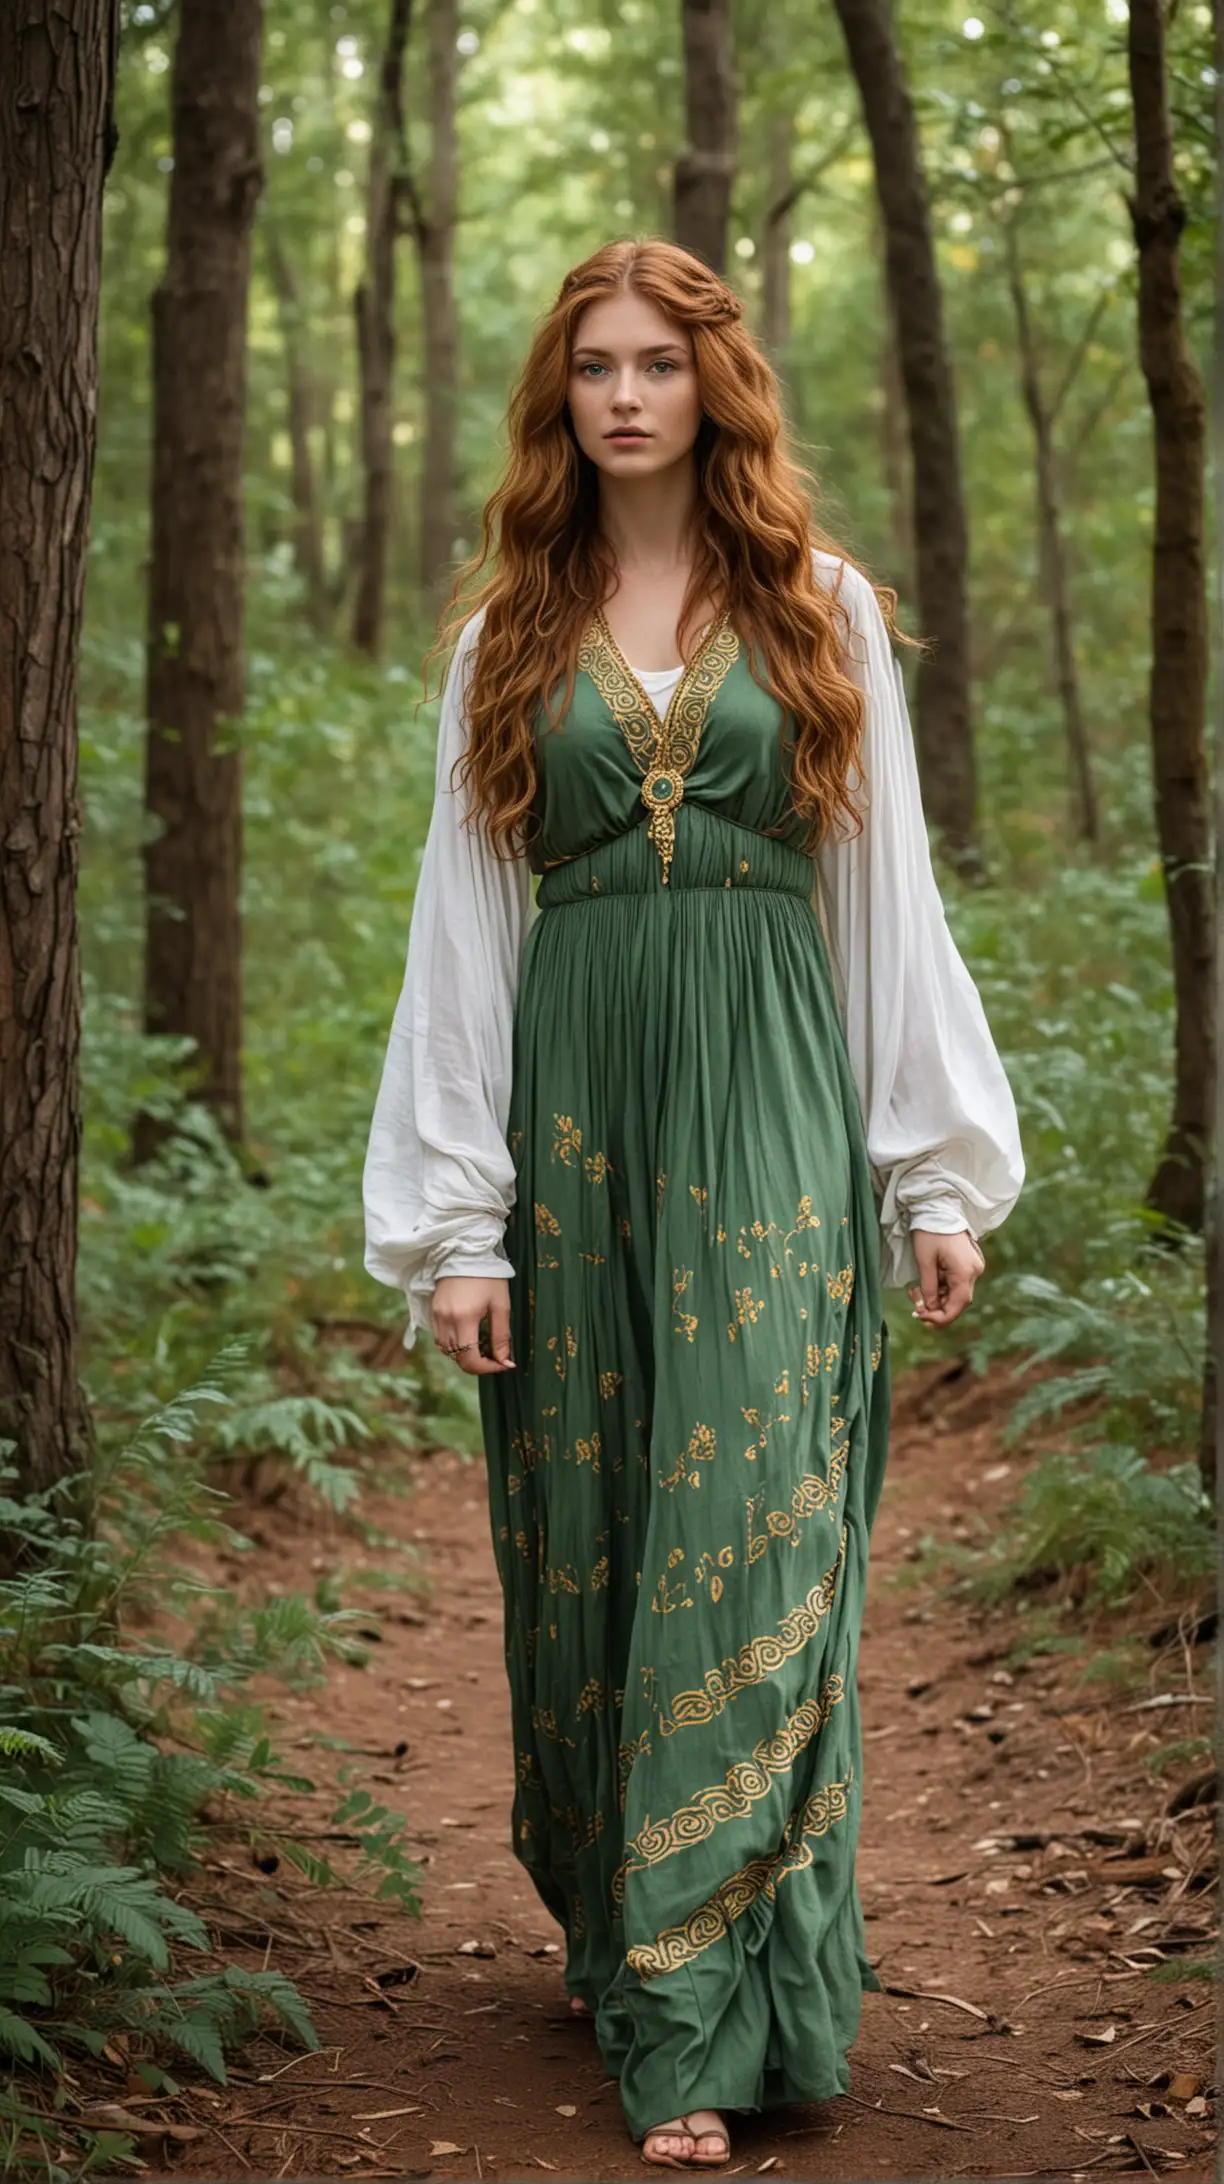 AuburnHaired Teen in Ancient Greek Attire Wanders Through Enchanted Forest